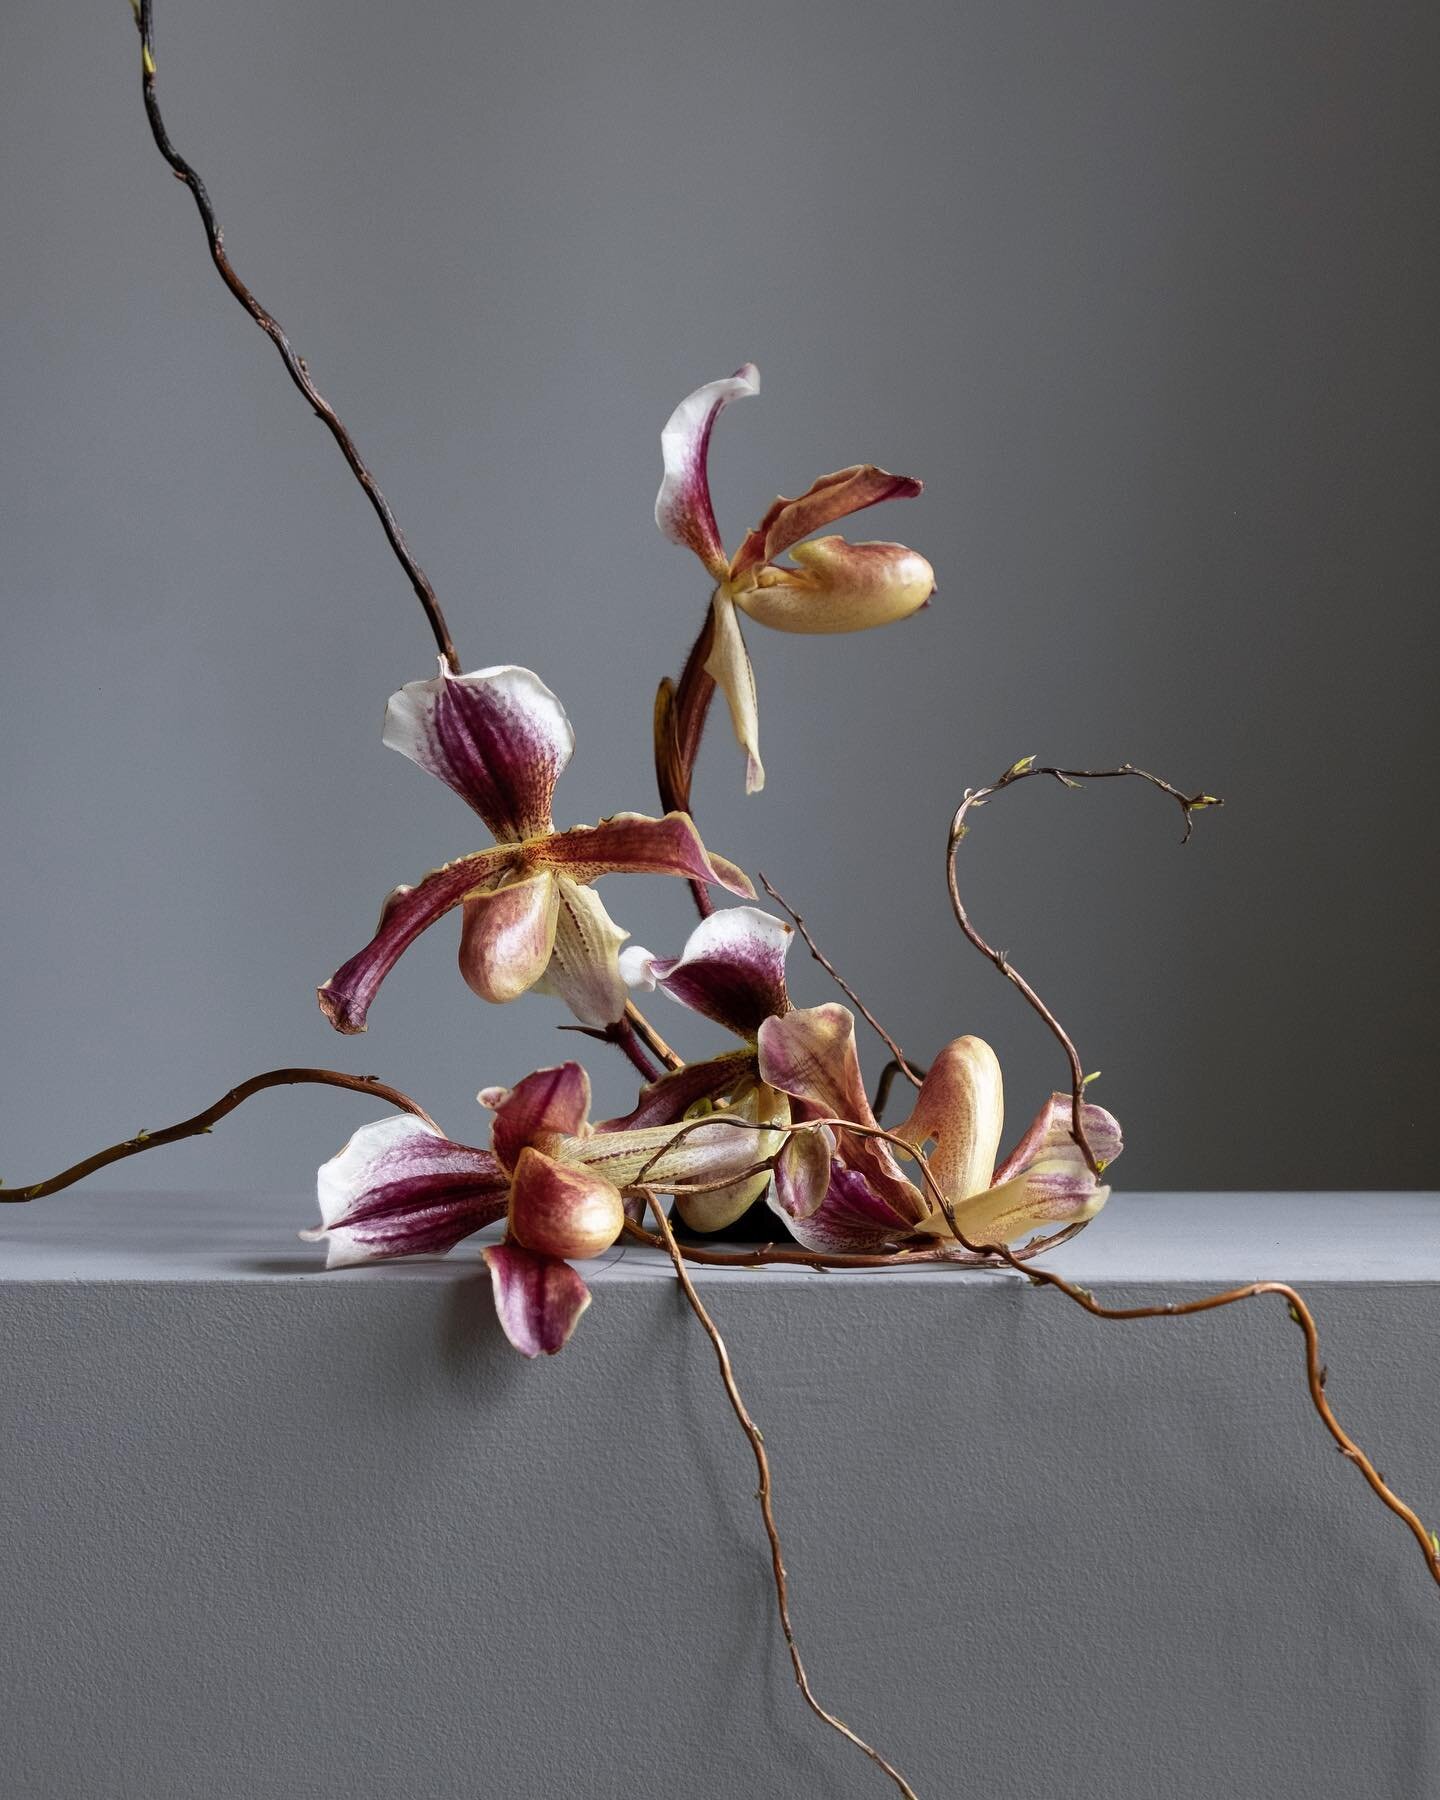 Used these slipper orchids and twisted willow branches for an interior styling shoot 2 weeks ago. Still going strong 💪🏻